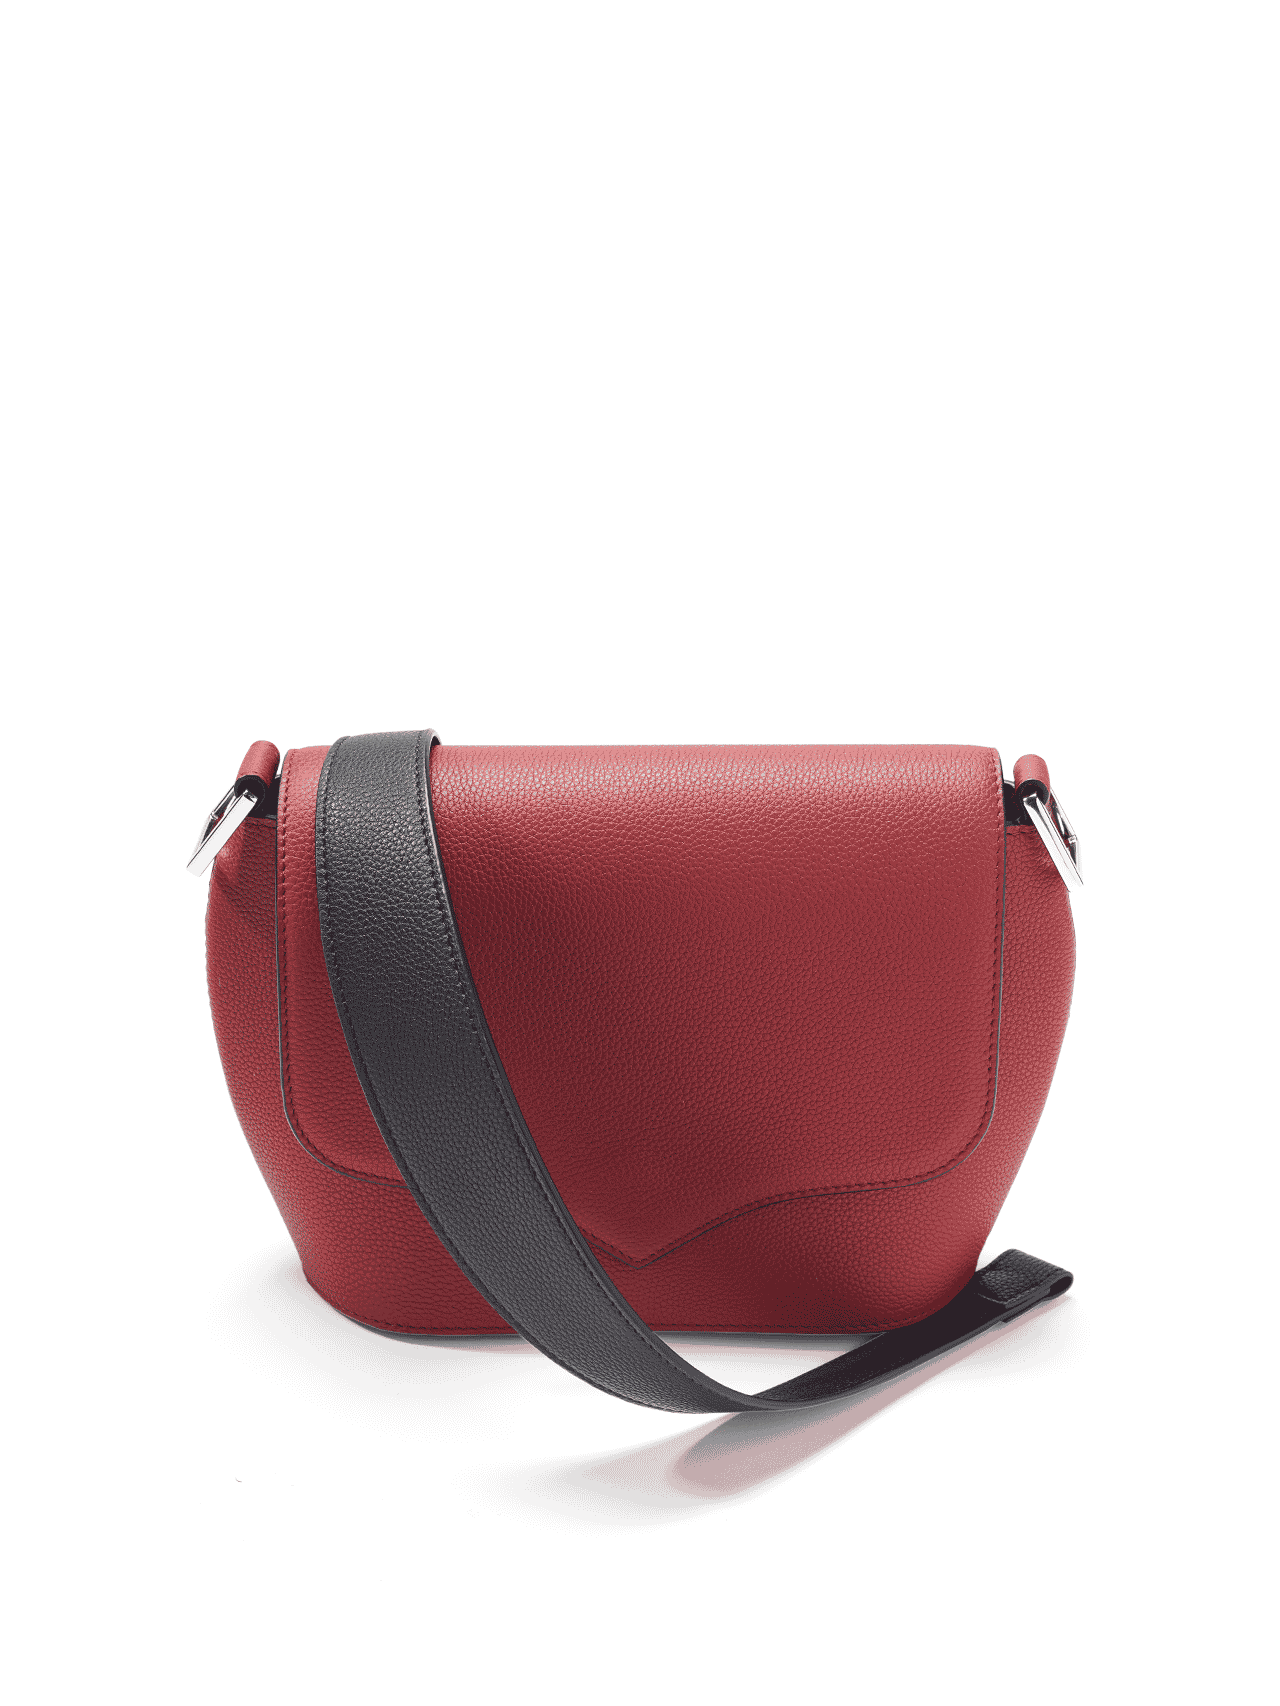 bag leather jean rousseau red black